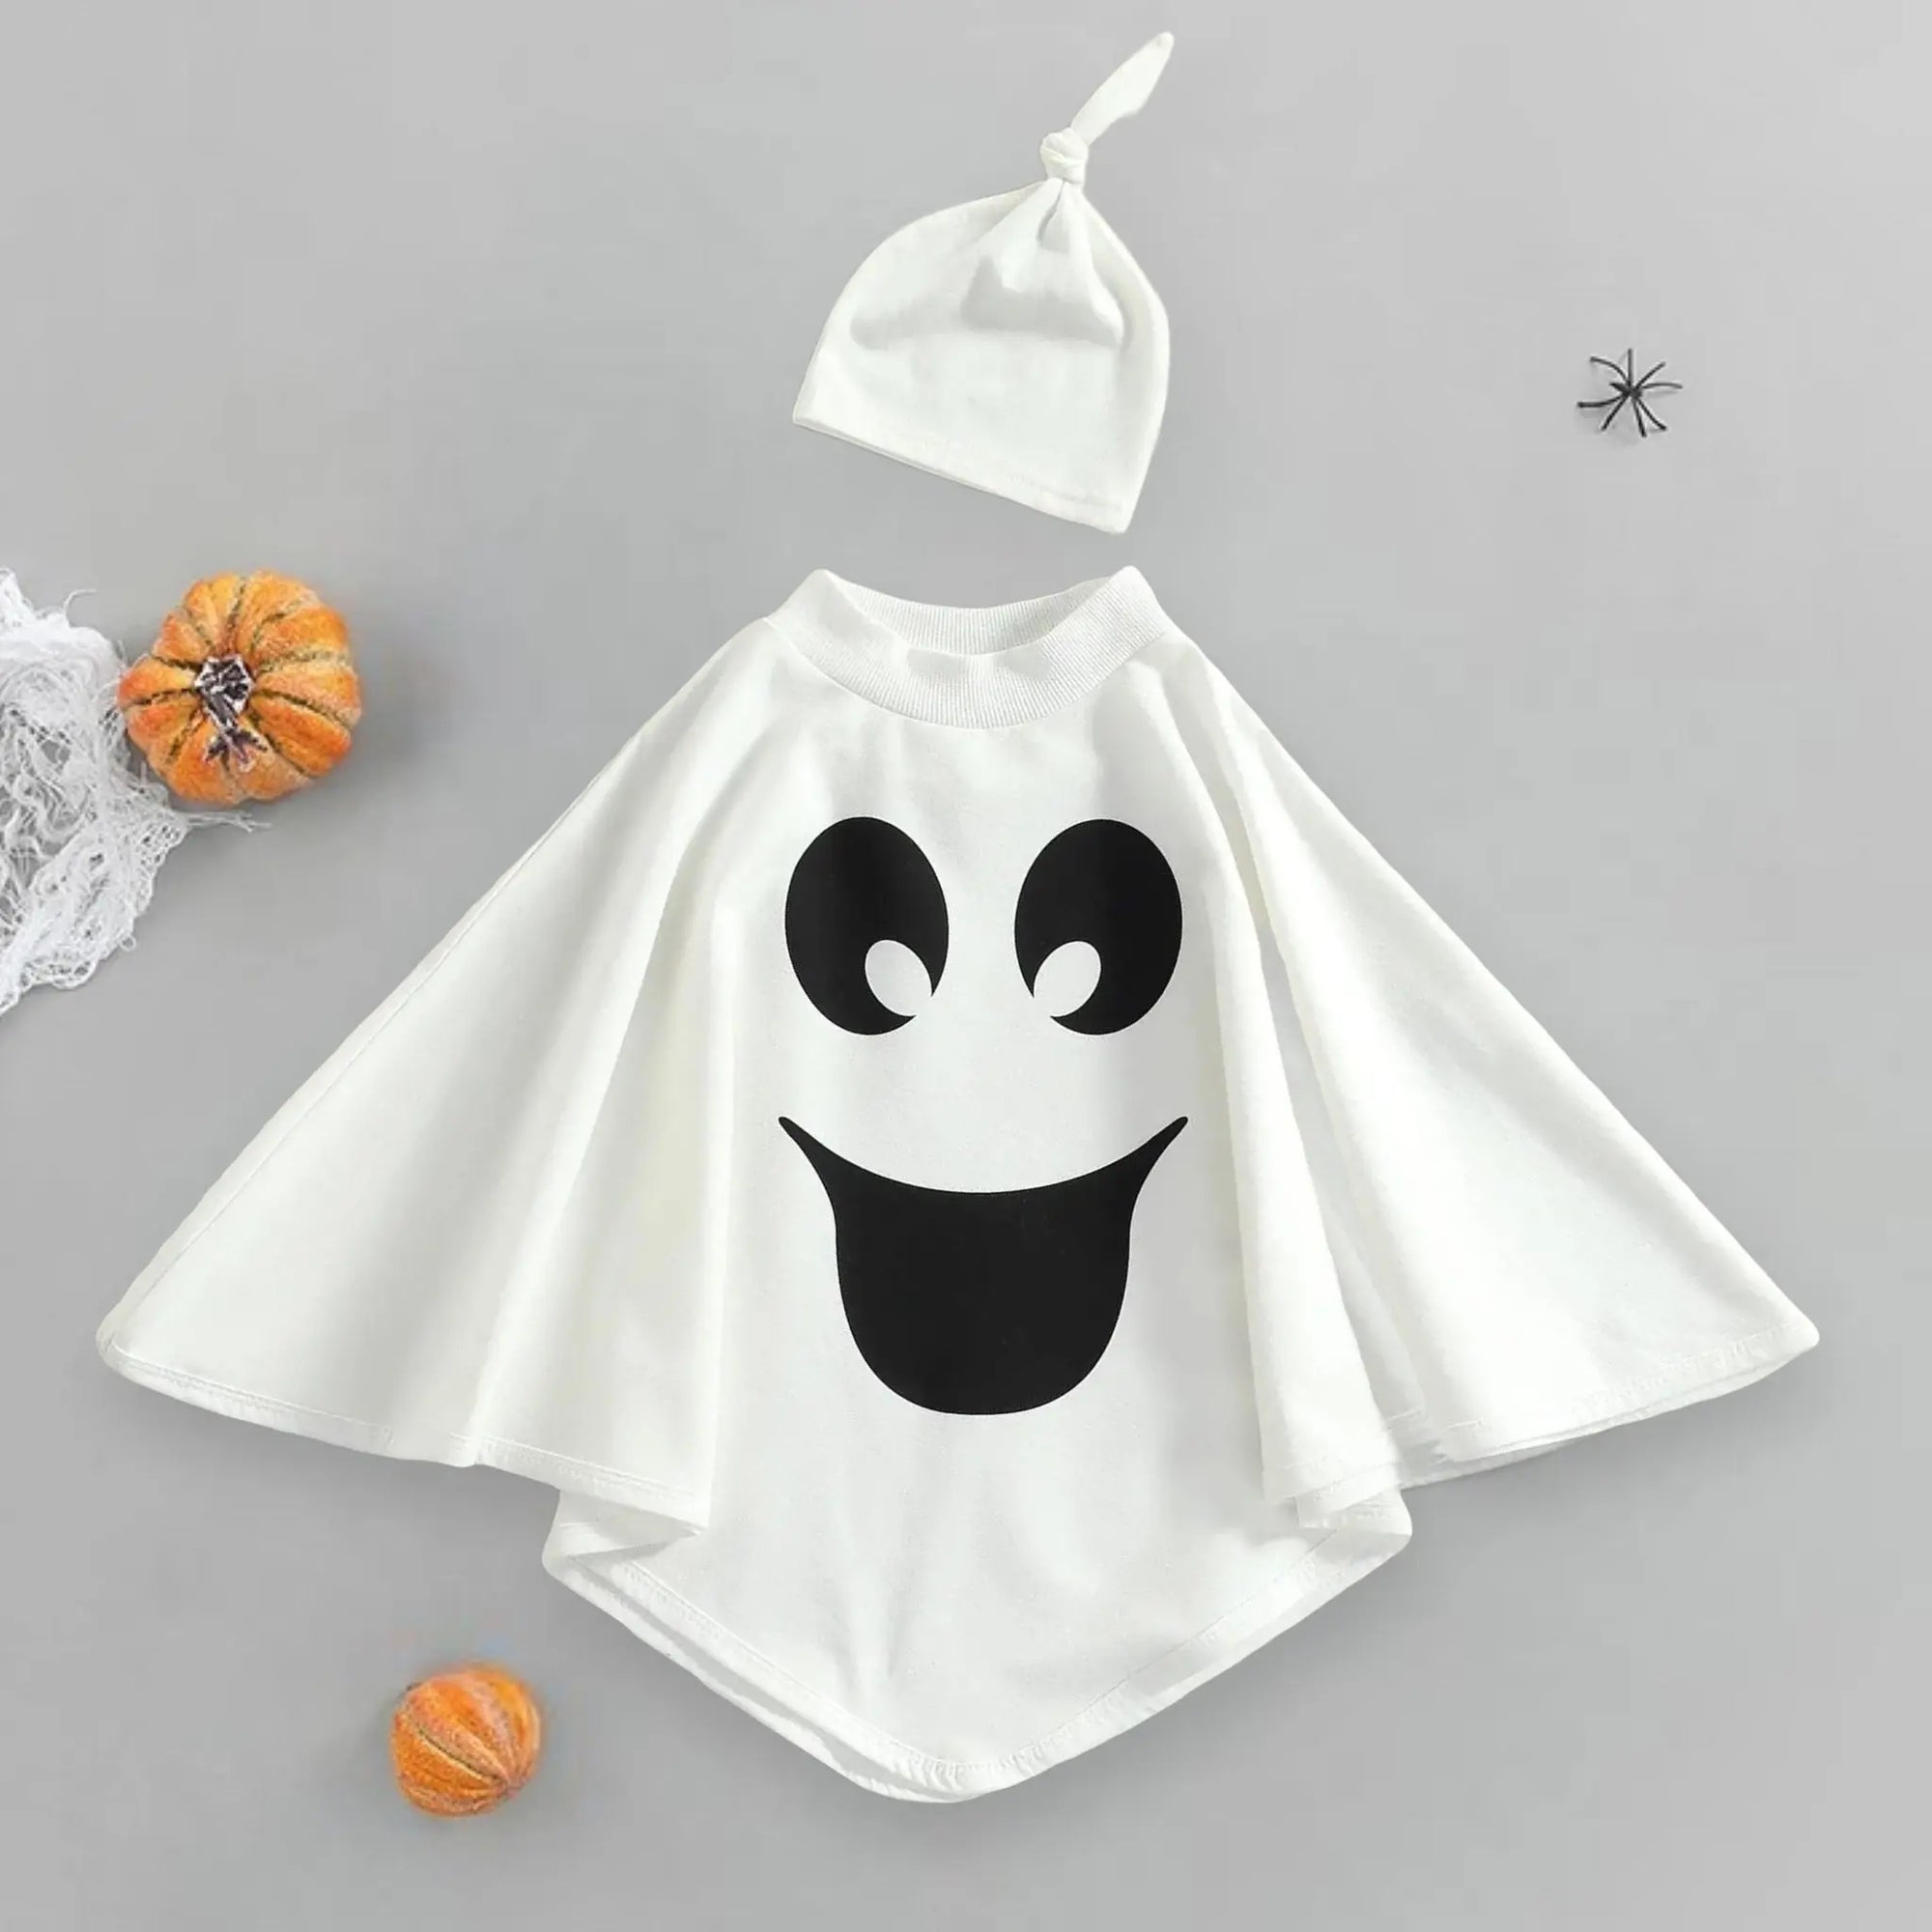 Unisex Ghost Costume Scary or Smily Face Cotton Cloak and Hat Bling Bling Baby Boutique